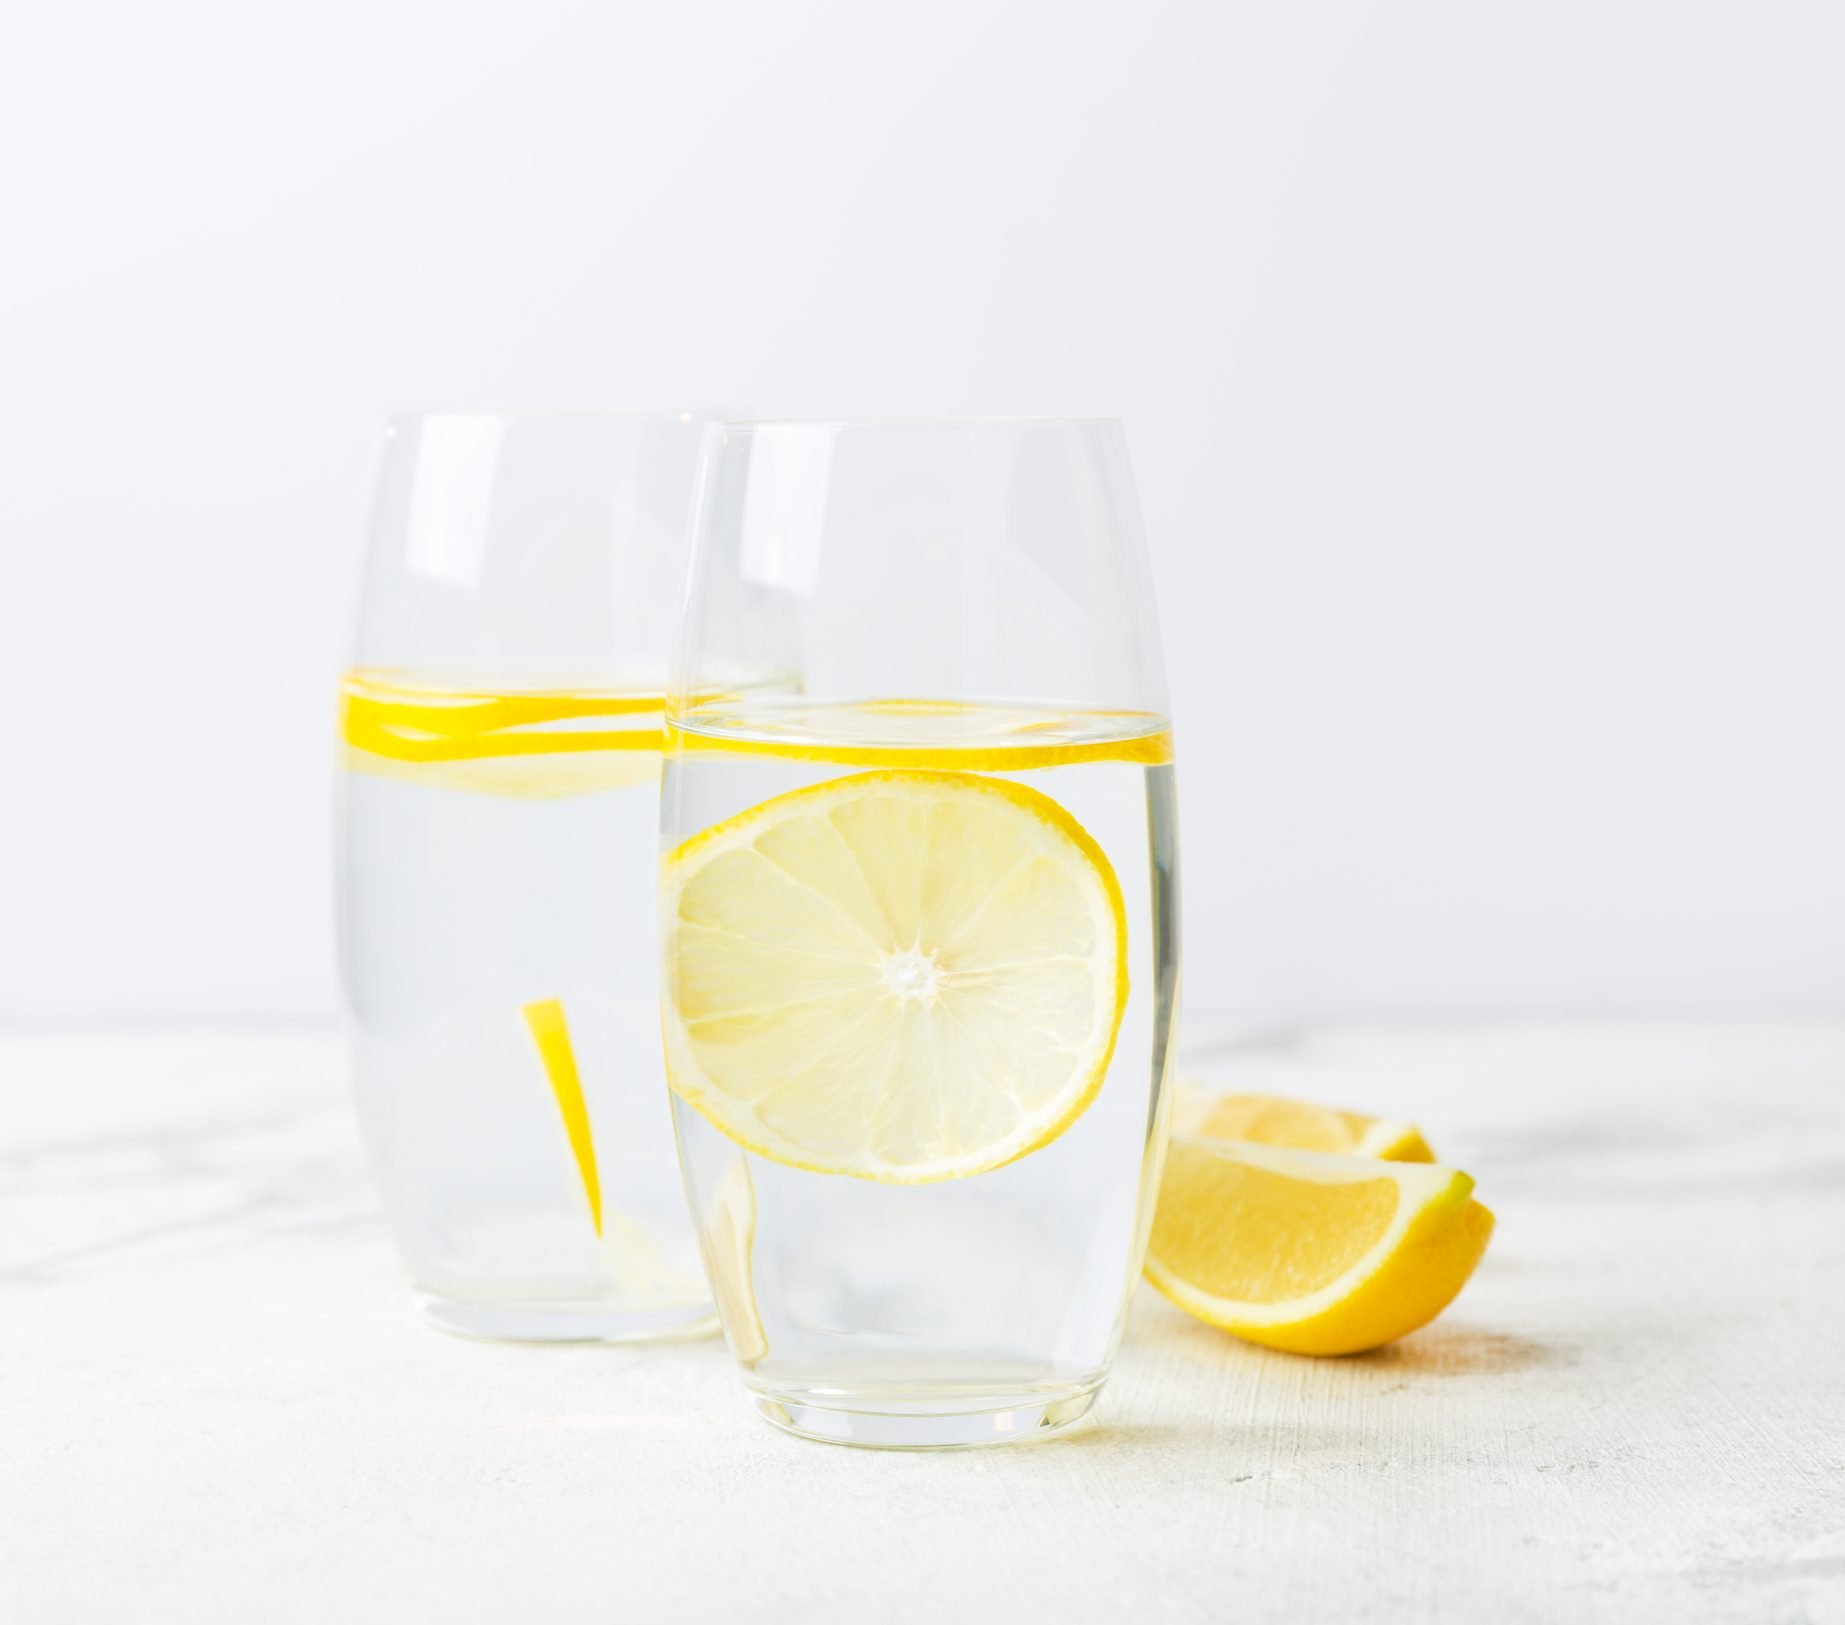 Can You Drink Lemon Water While Fasting?